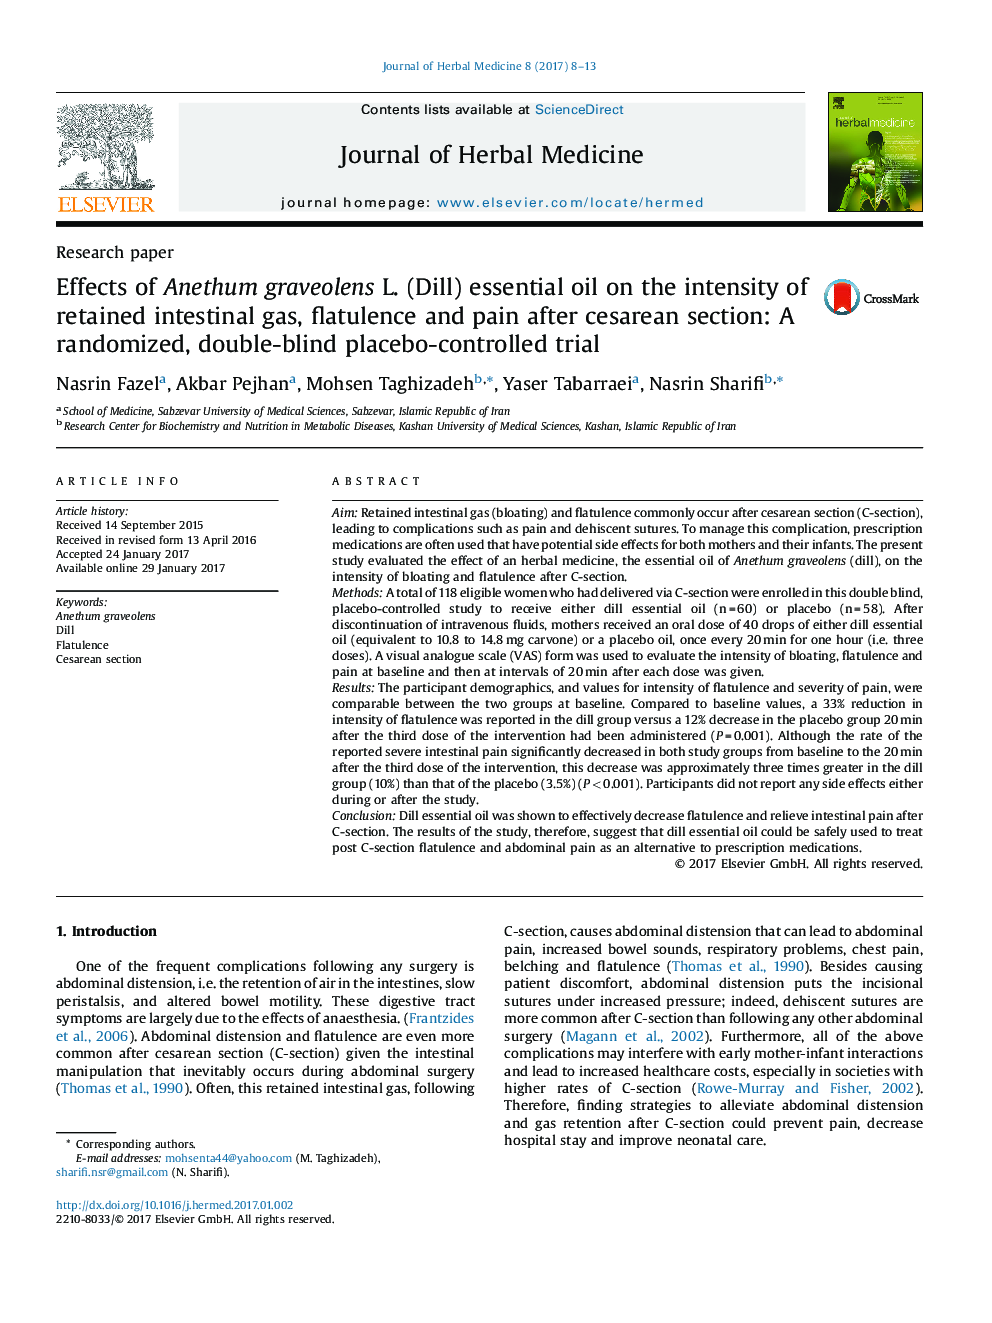 Effects of Anethum graveolens L. (Dill) essential oil on the intensity of retained intestinal gas, flatulence and pain after cesarean section: A randomized, double-blind placebo-controlled trial